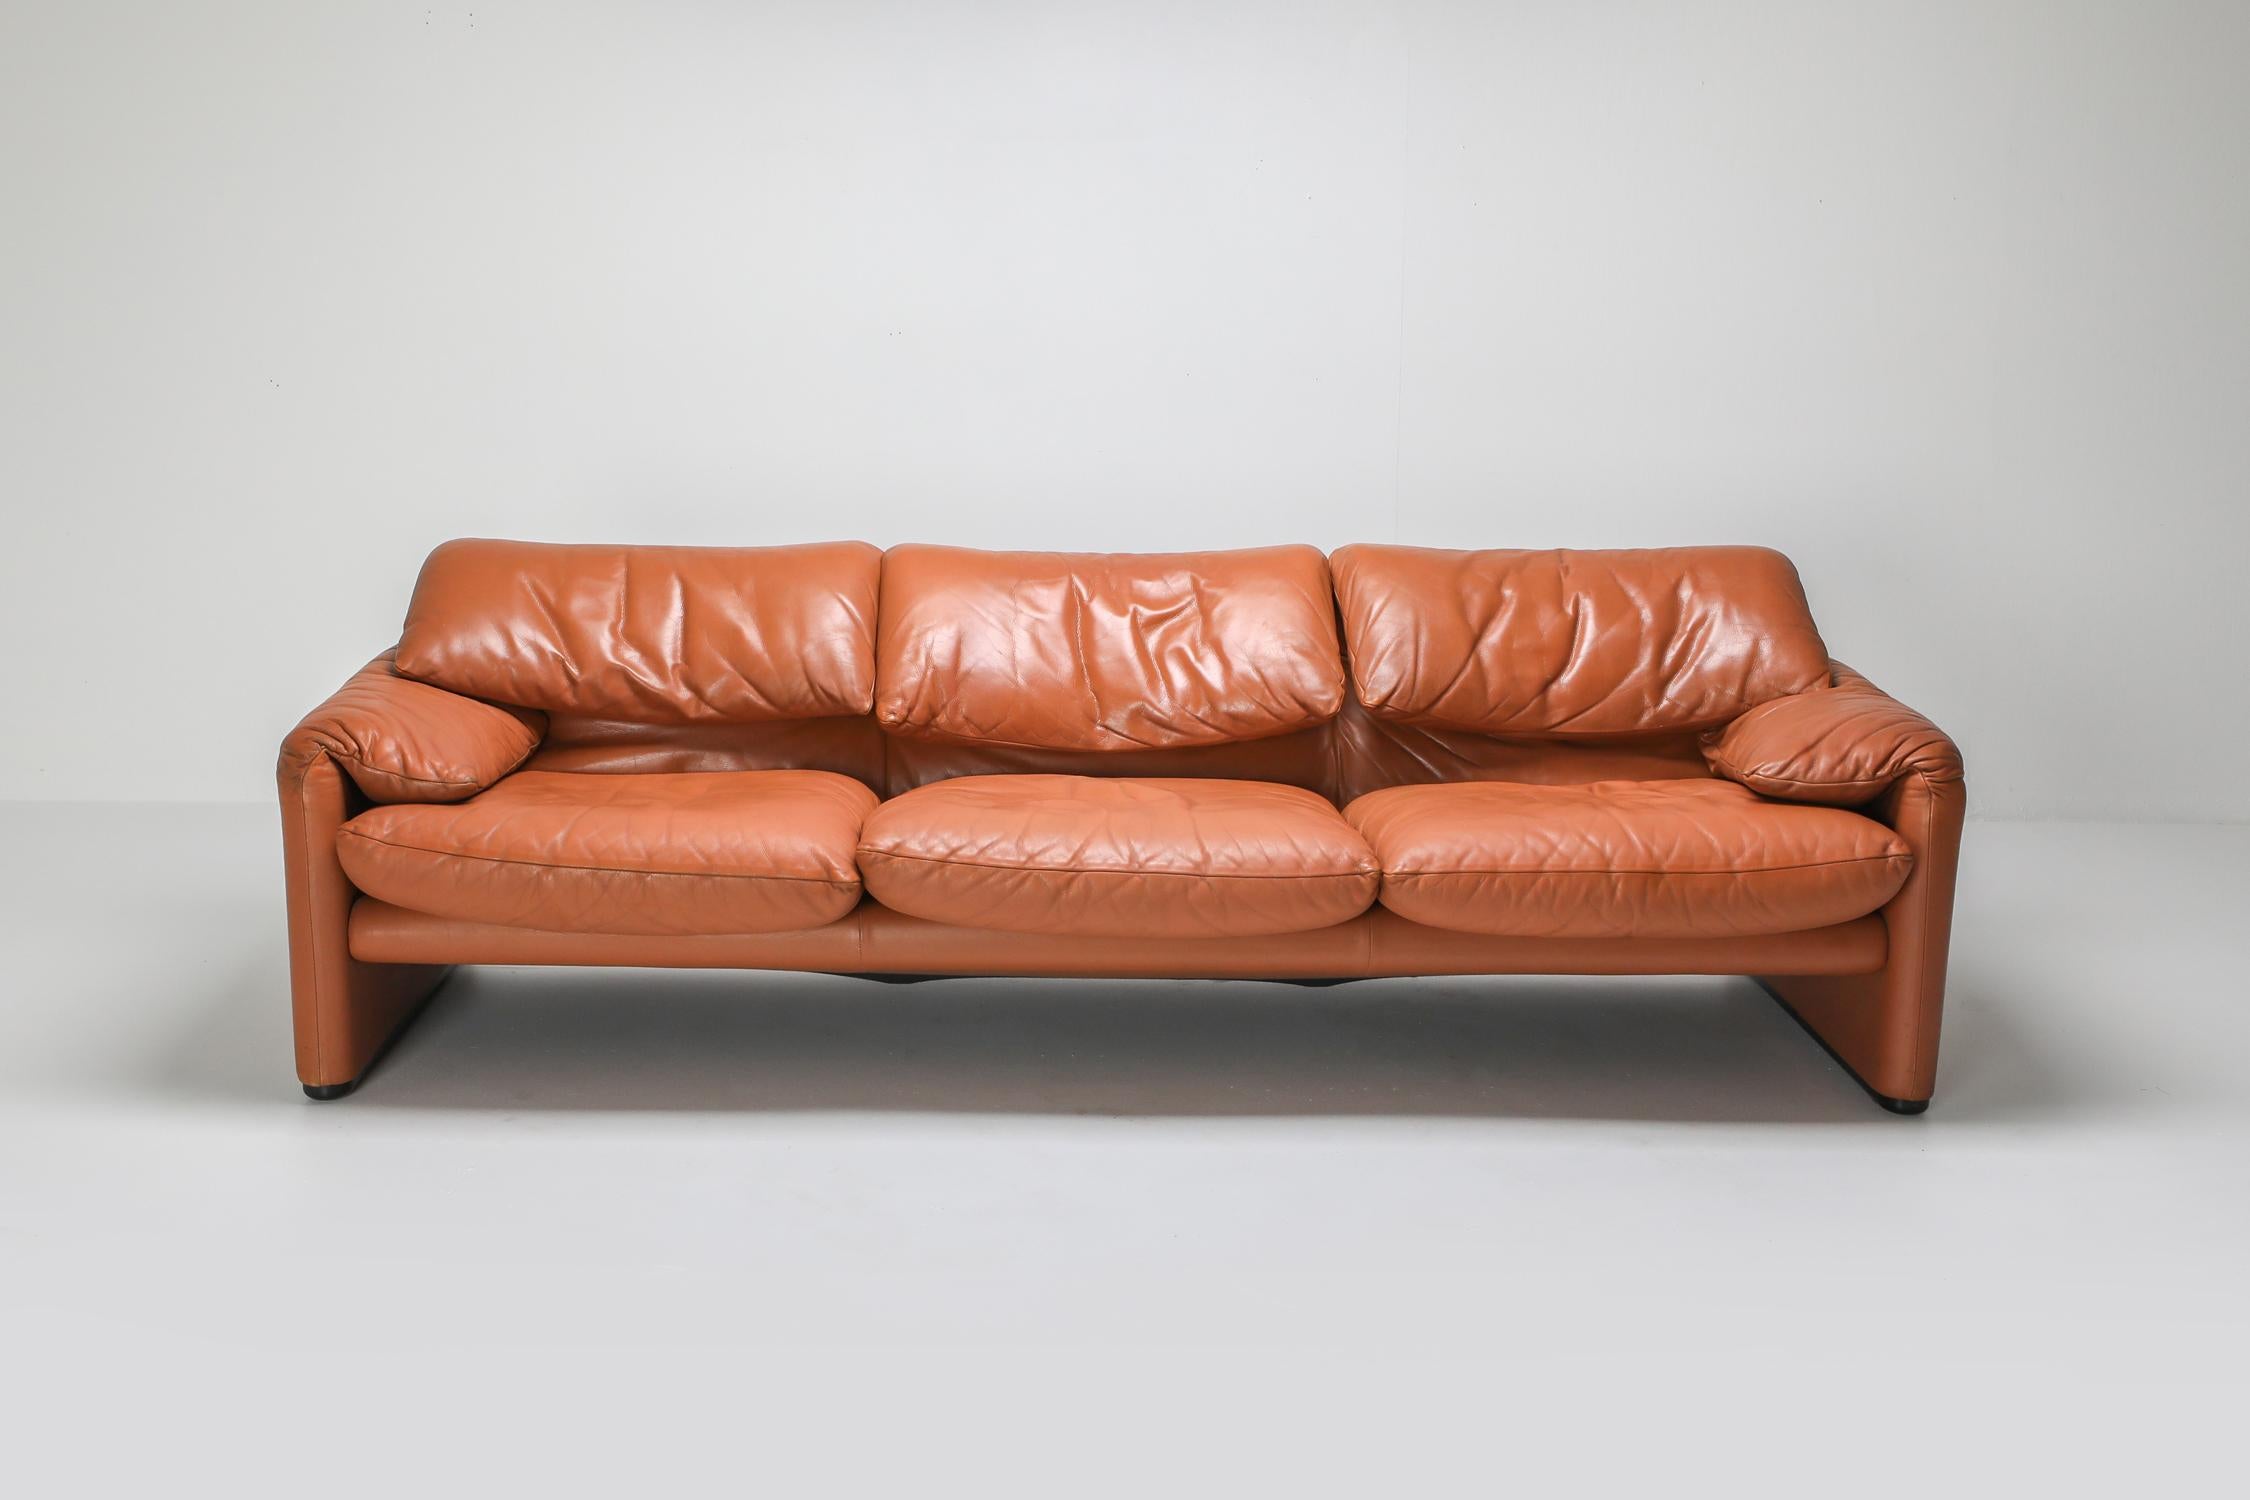 Post-Modern Maralunga Cognac Leather Couch by Vico Magistretti for Cassina, 1974